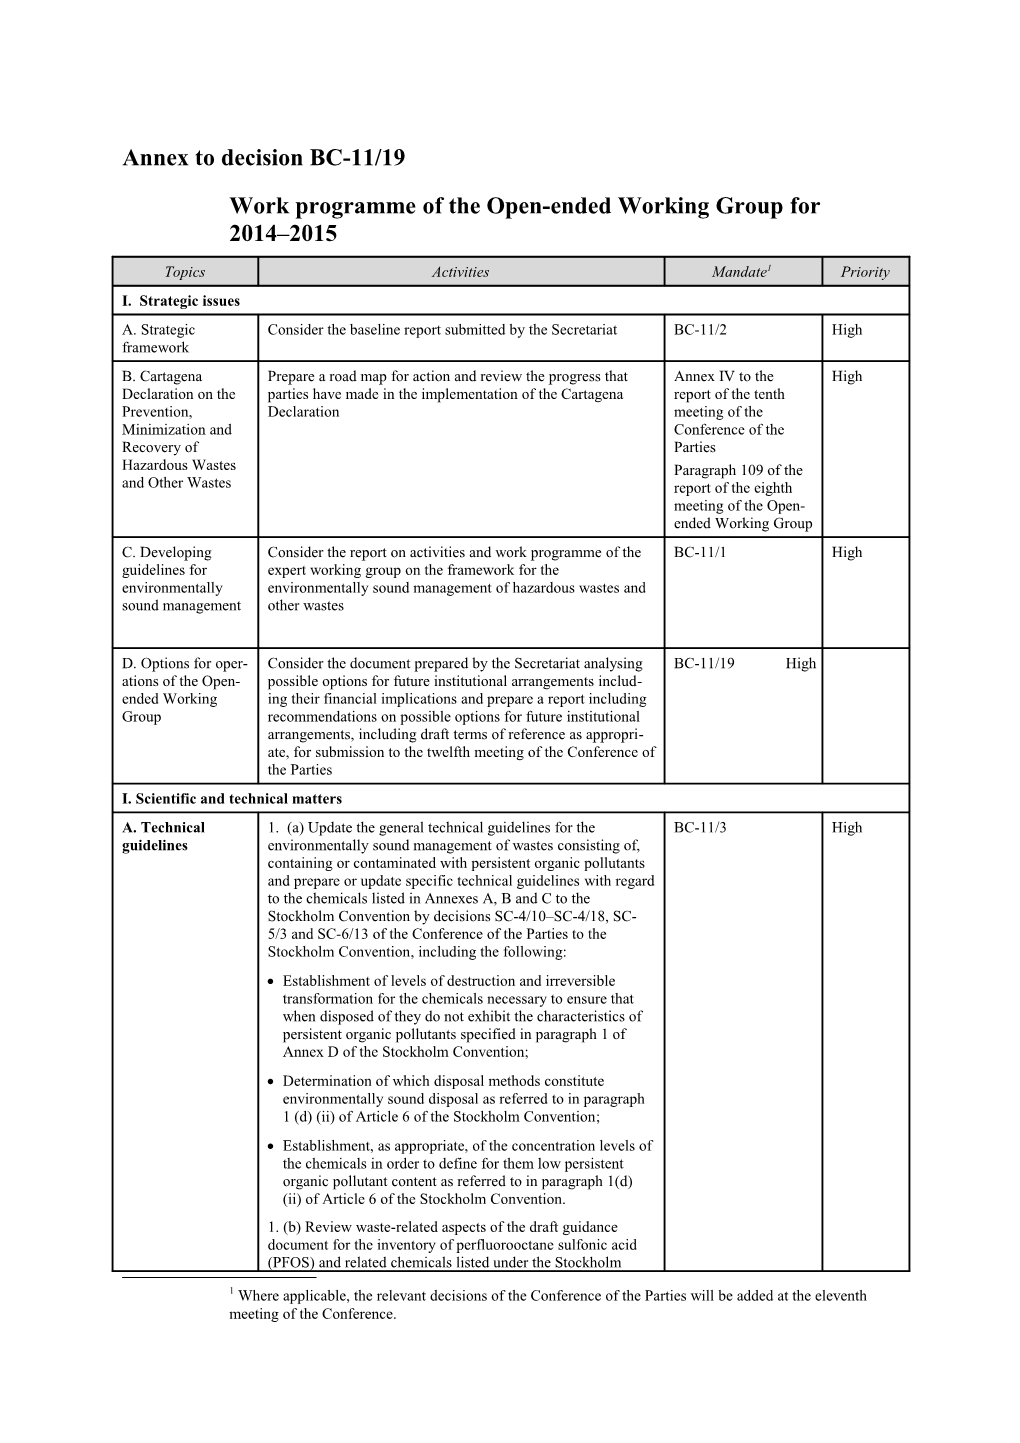 Work Programme of the Open-Ended Working Group for 2014 2015